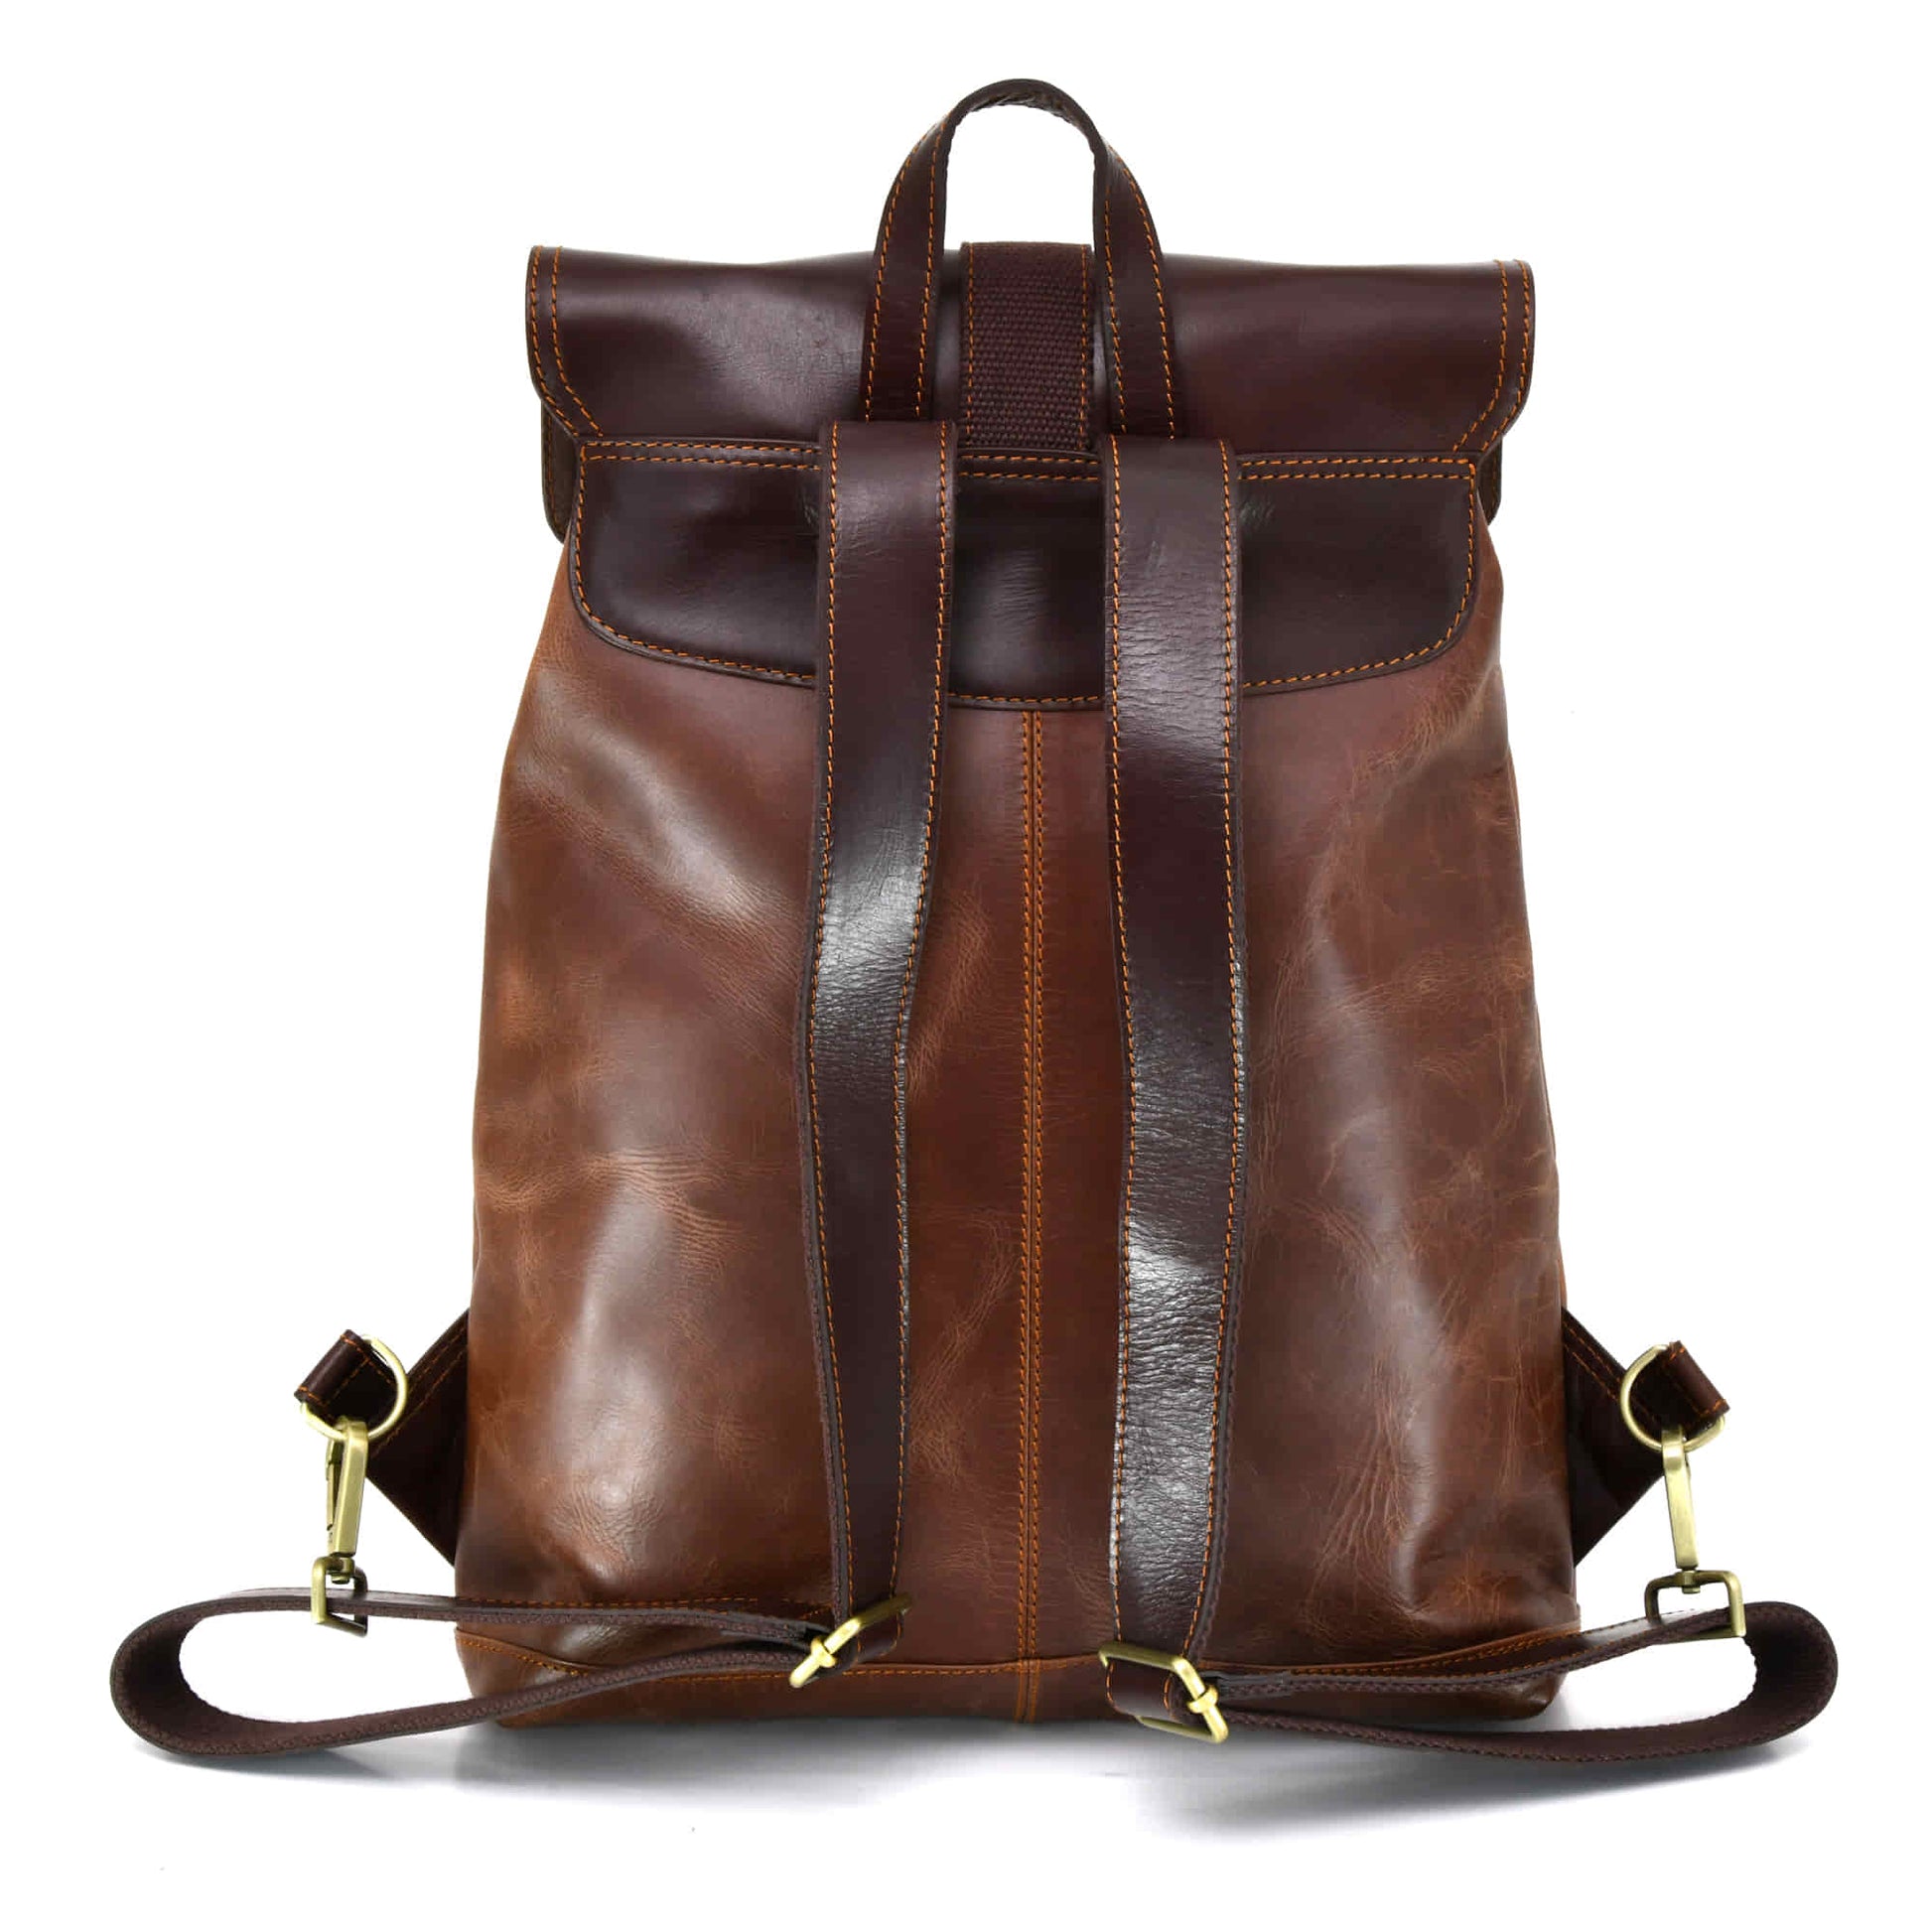 Style n Craft 392152 Tall Backpack in Light & Dark Brown Combination Full Grain Leather - Back view showing the adjustable leather shoulder straps & the hand carry leather handle in dark brown color 